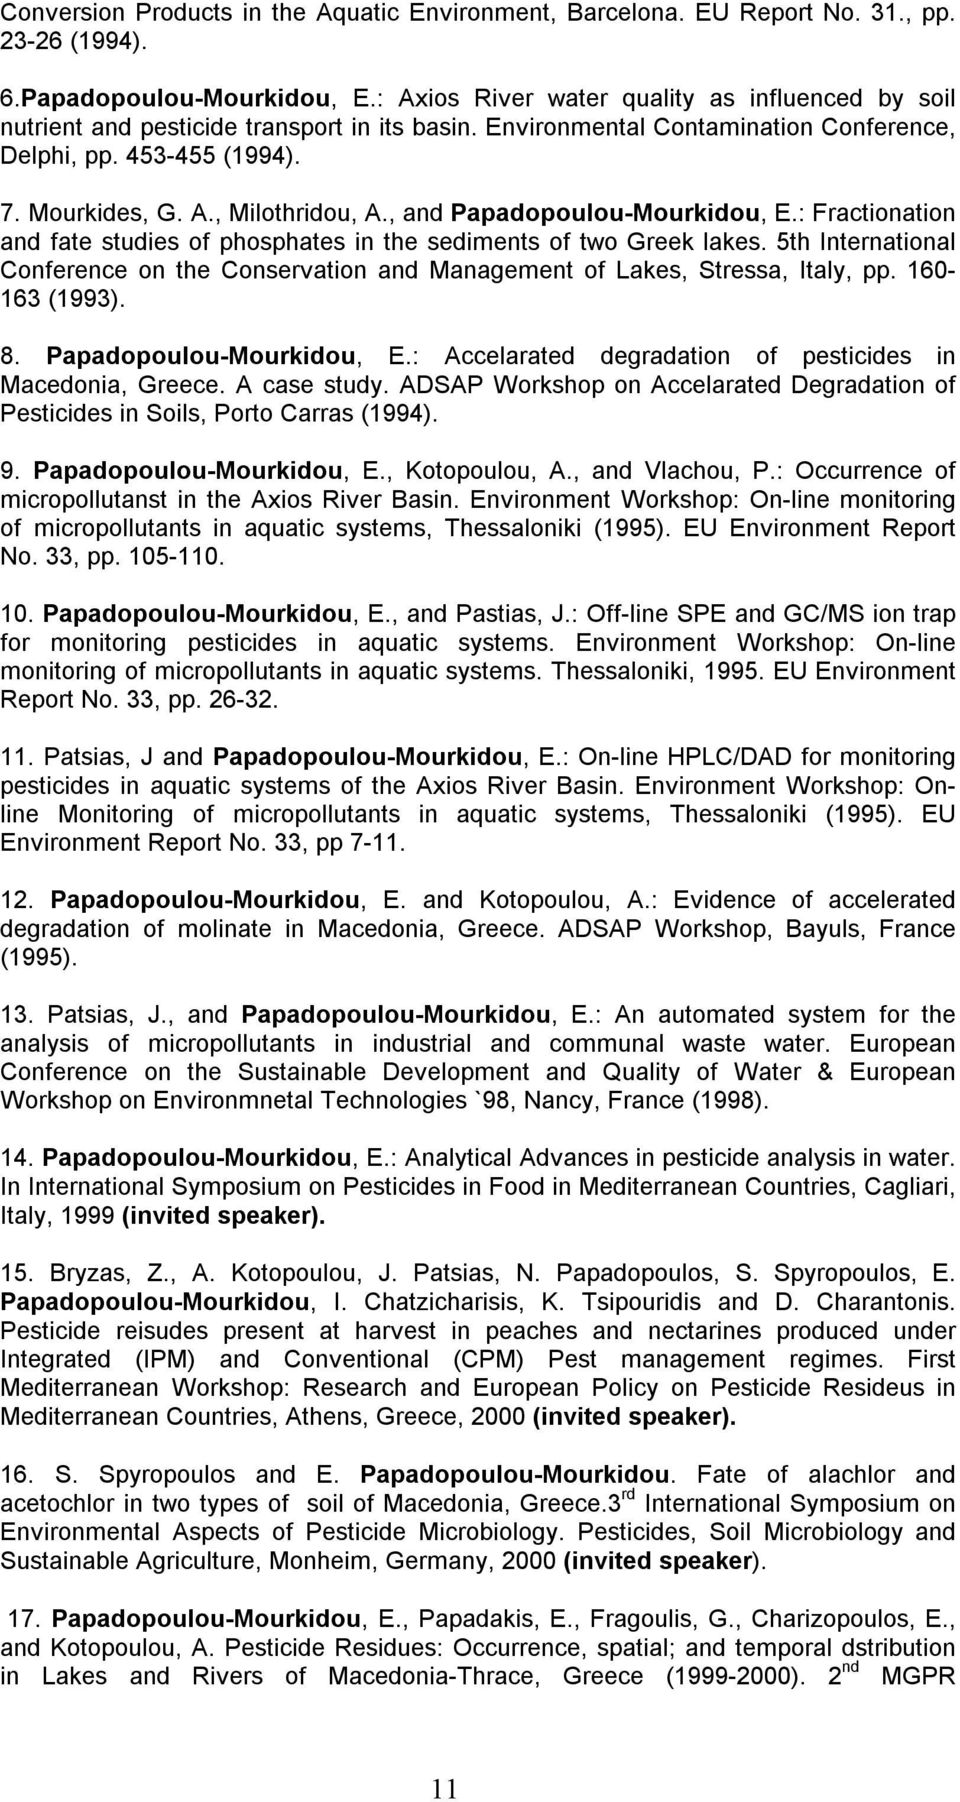 , and Papadopoulou-Mourkidou, E.: Fractionation and fate studies of phosphates in the sediments of two Greek lakes.